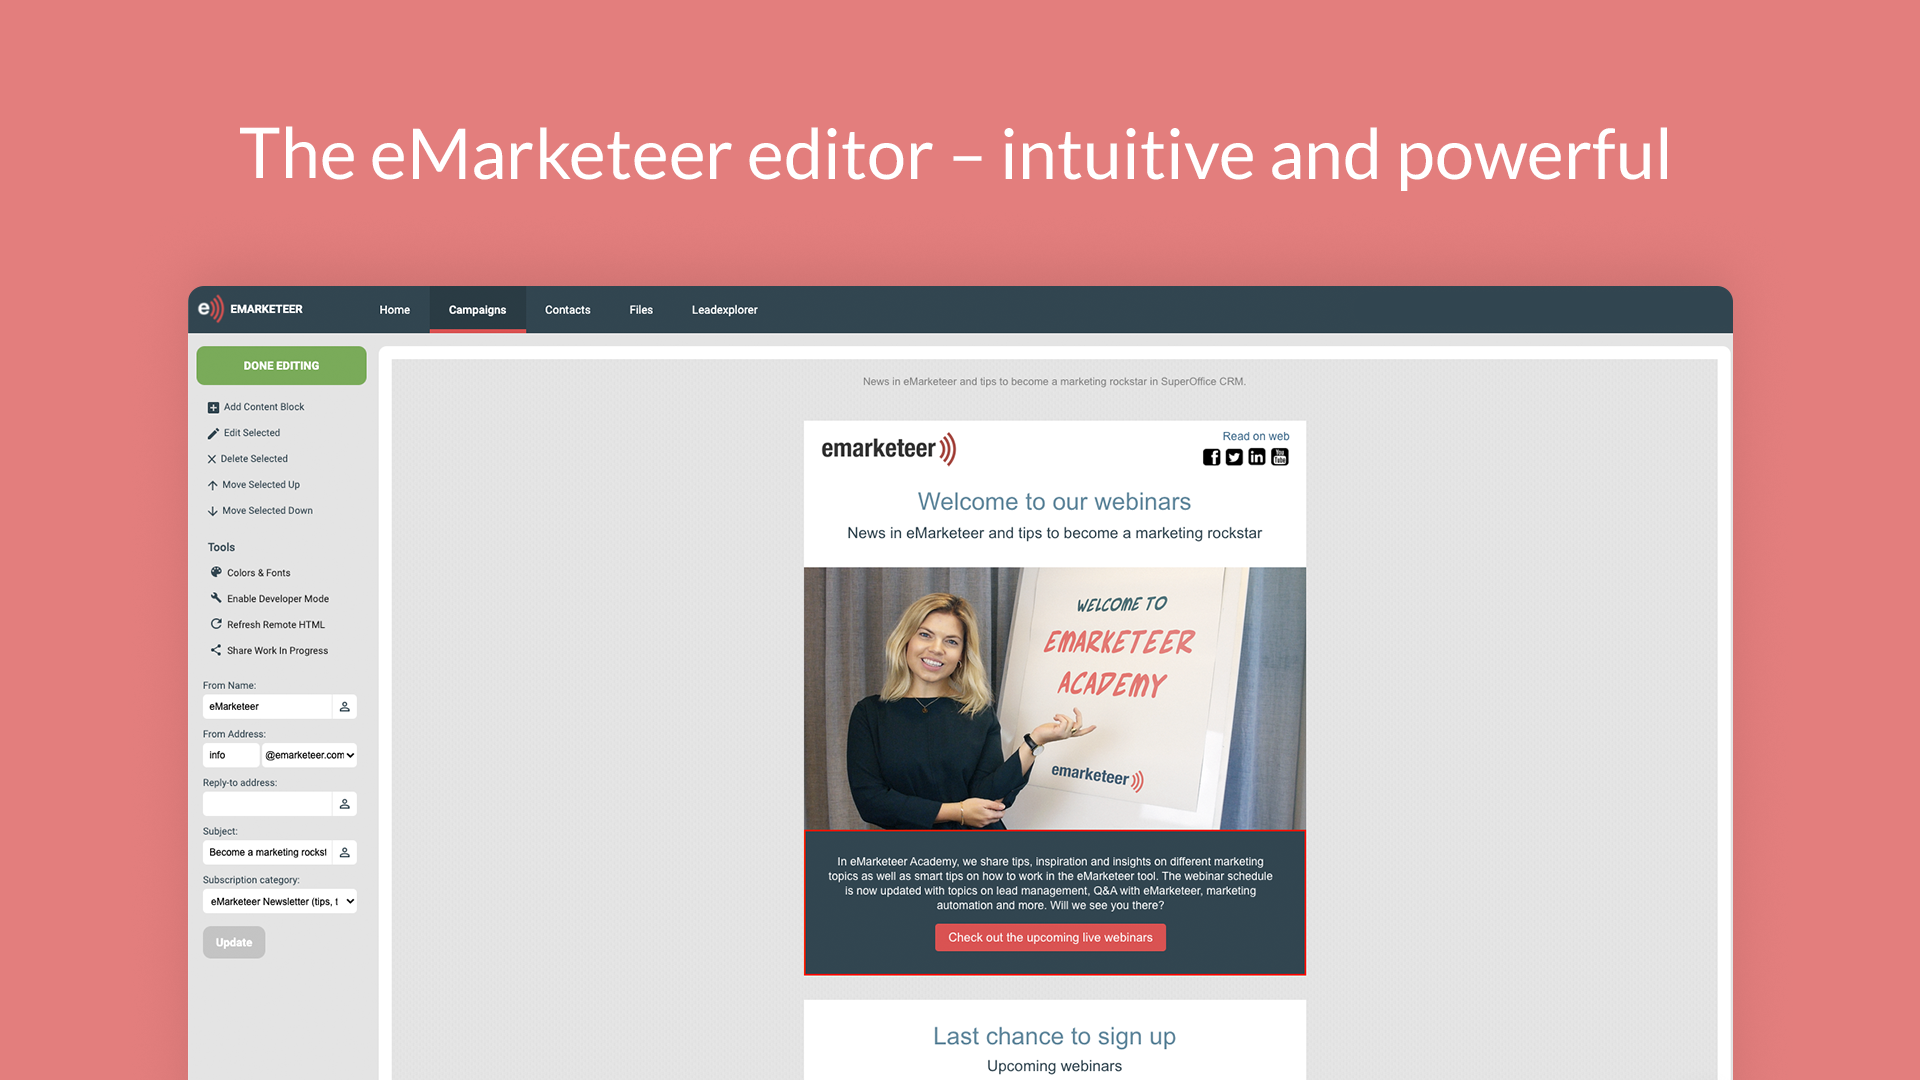 The eMarketeer editor – intuitive and powerful